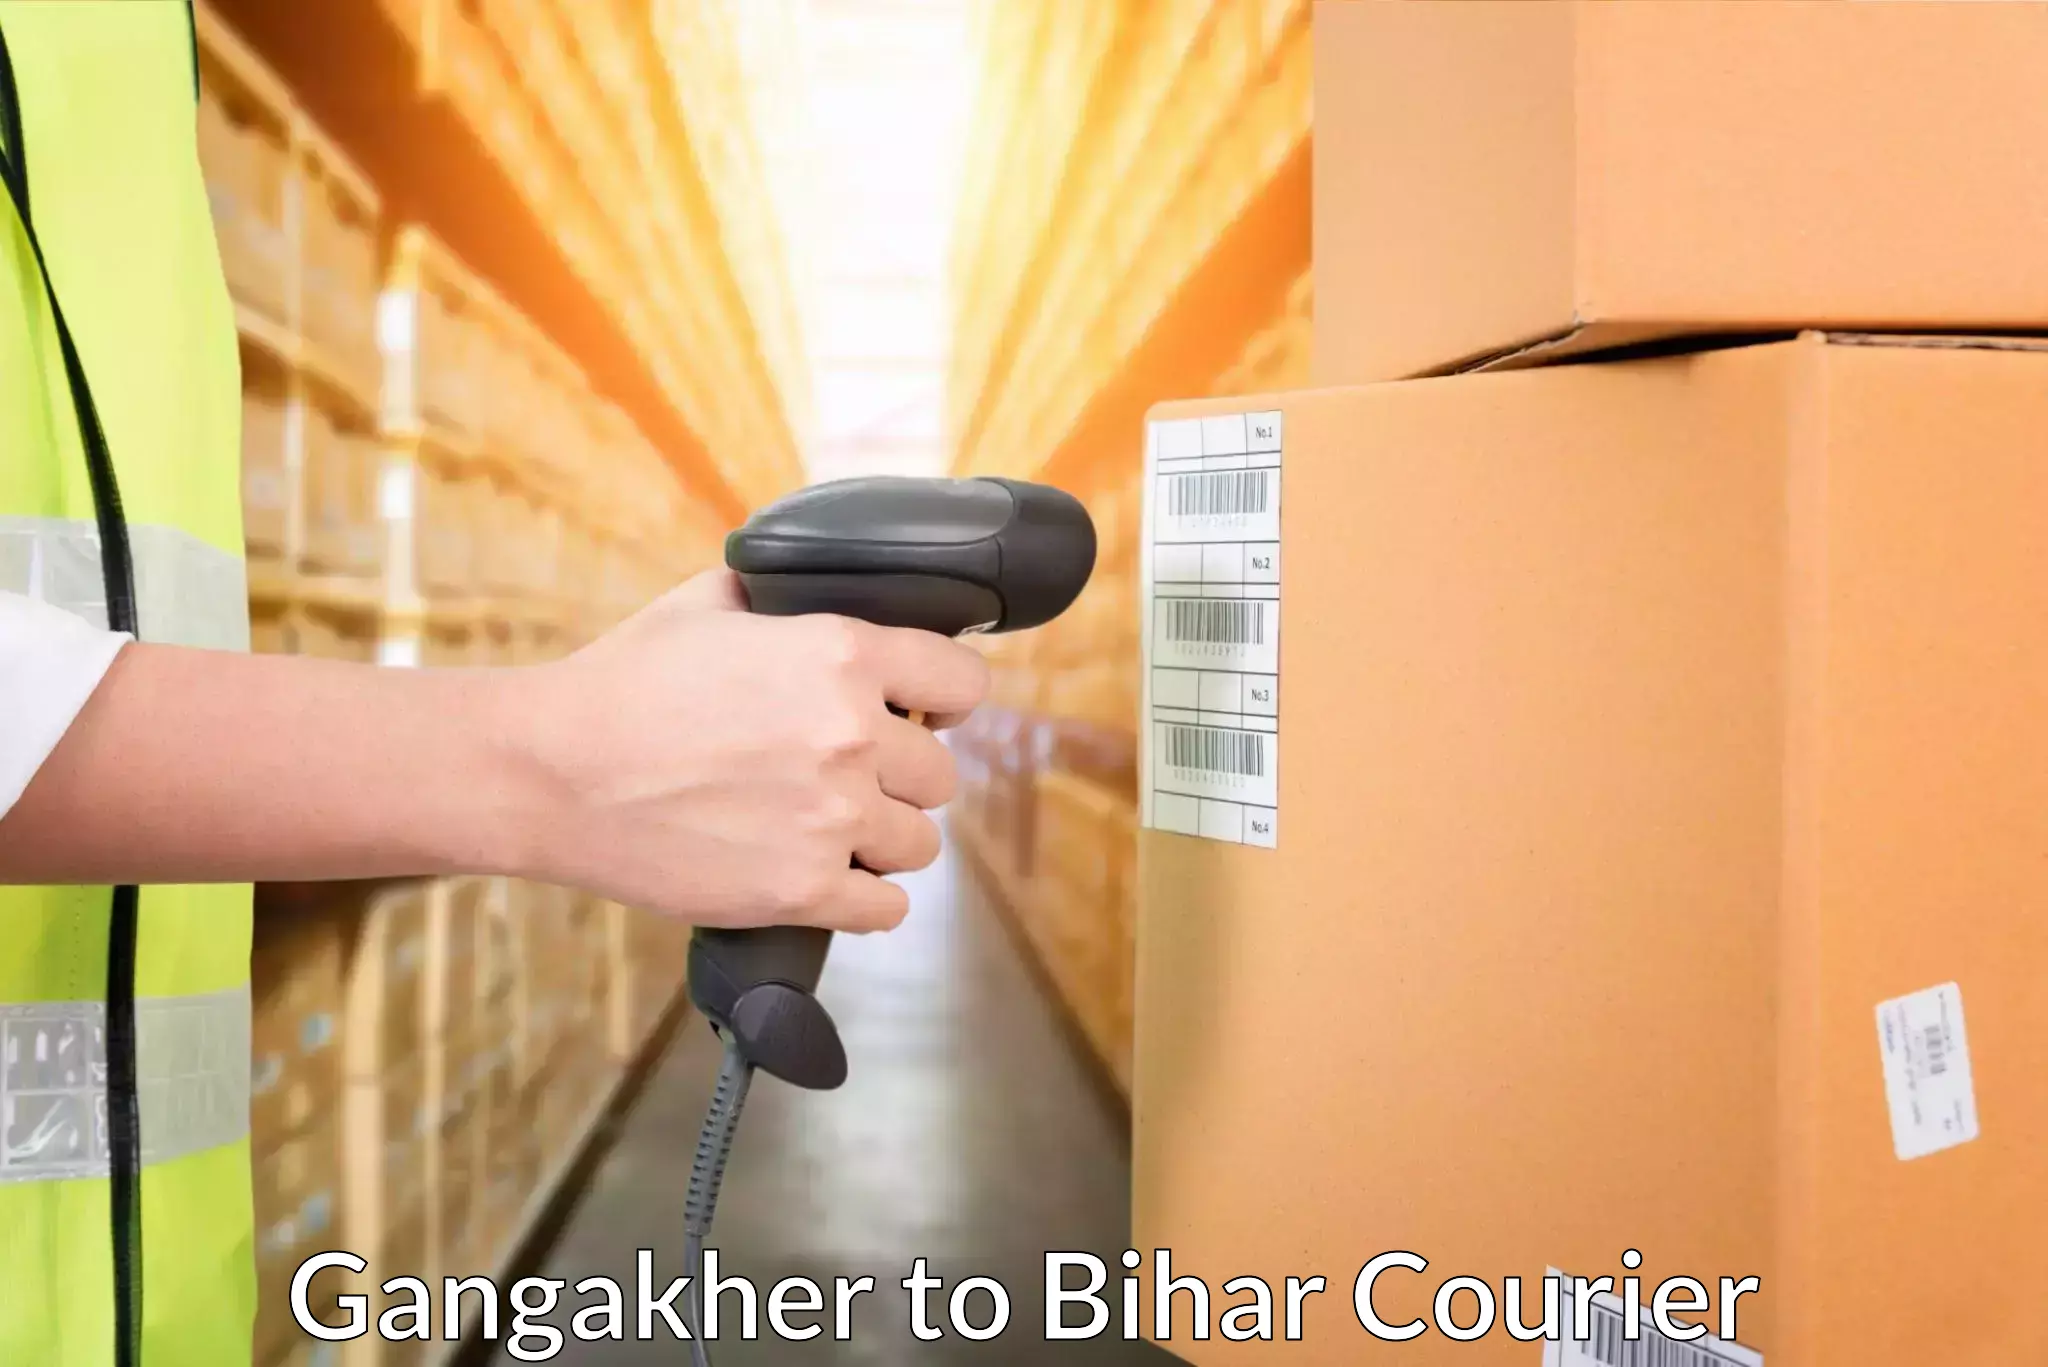 Flexible delivery schedules Gangakher to Sandesh